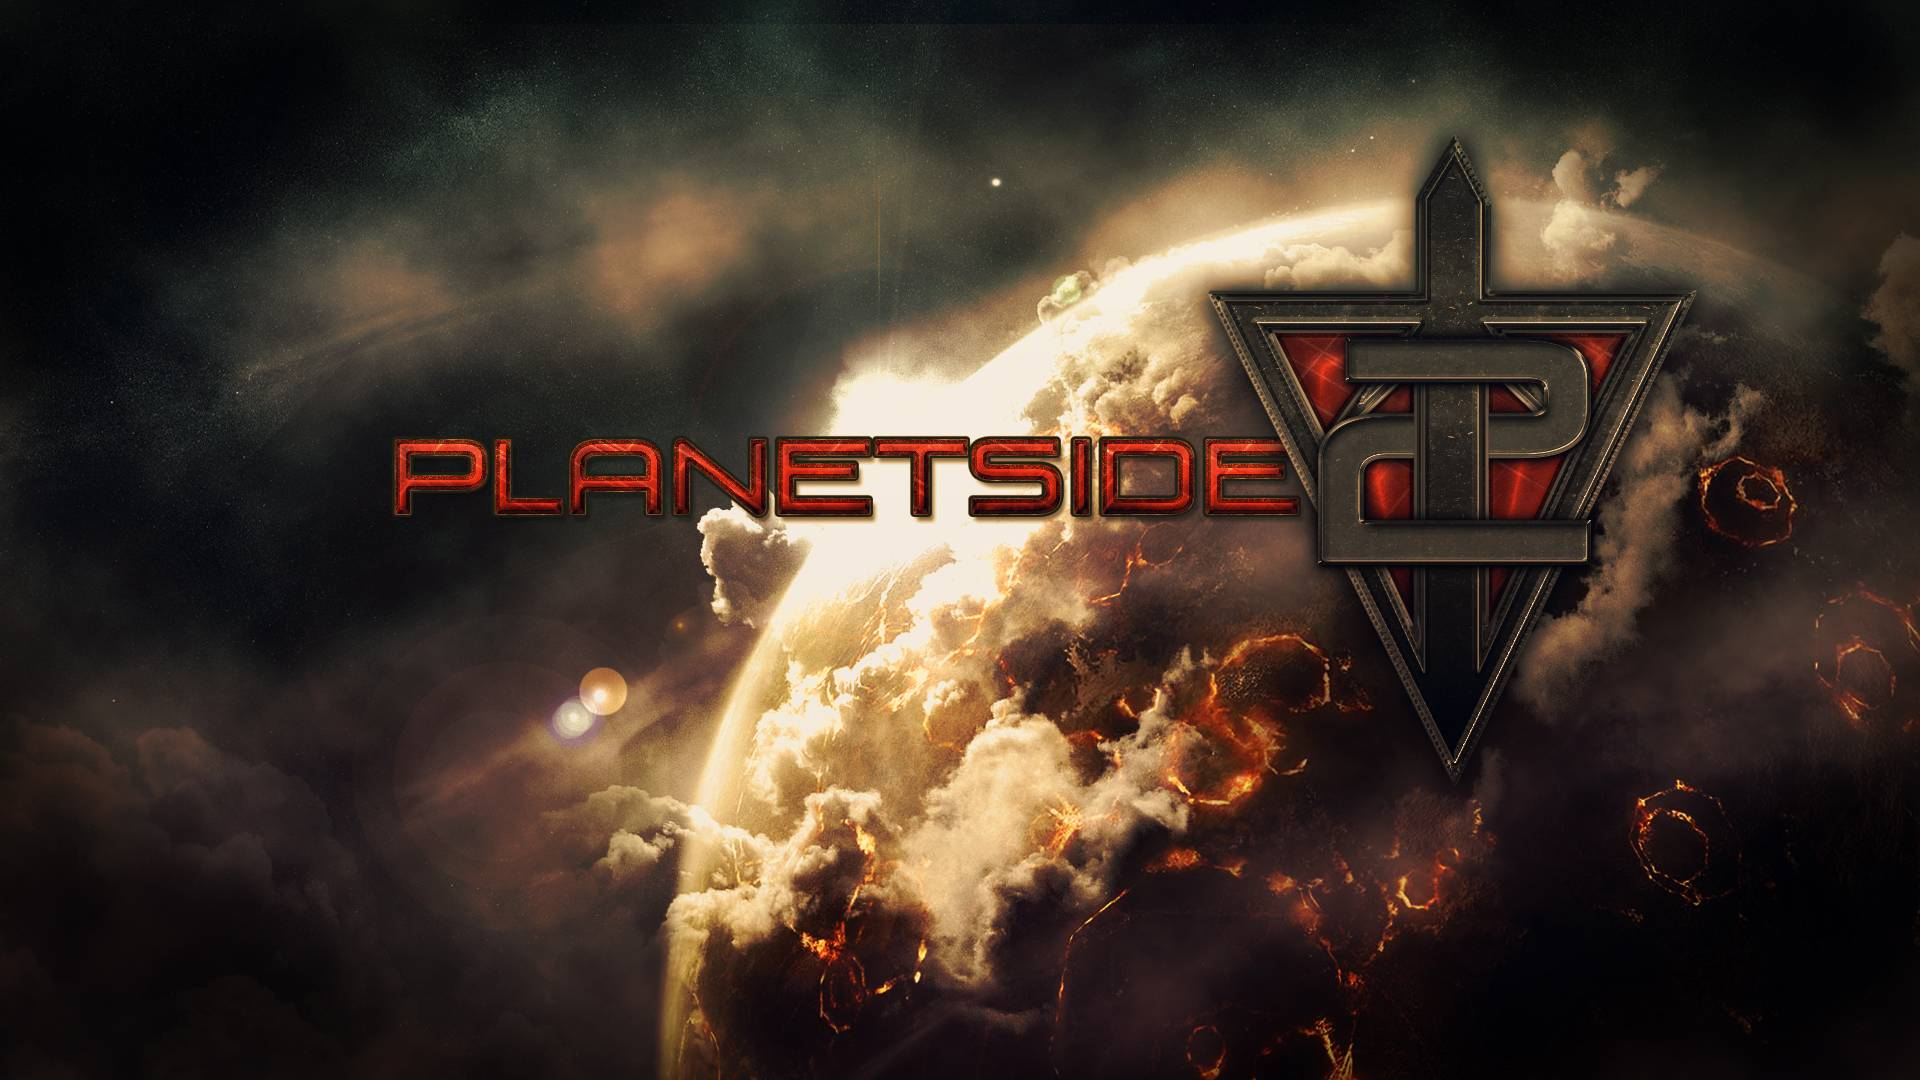 1920x1080 PlanetSide 2 PS4 Will Have Visuals On Par With A High End PC, Will Be Using DualShock 4 Features